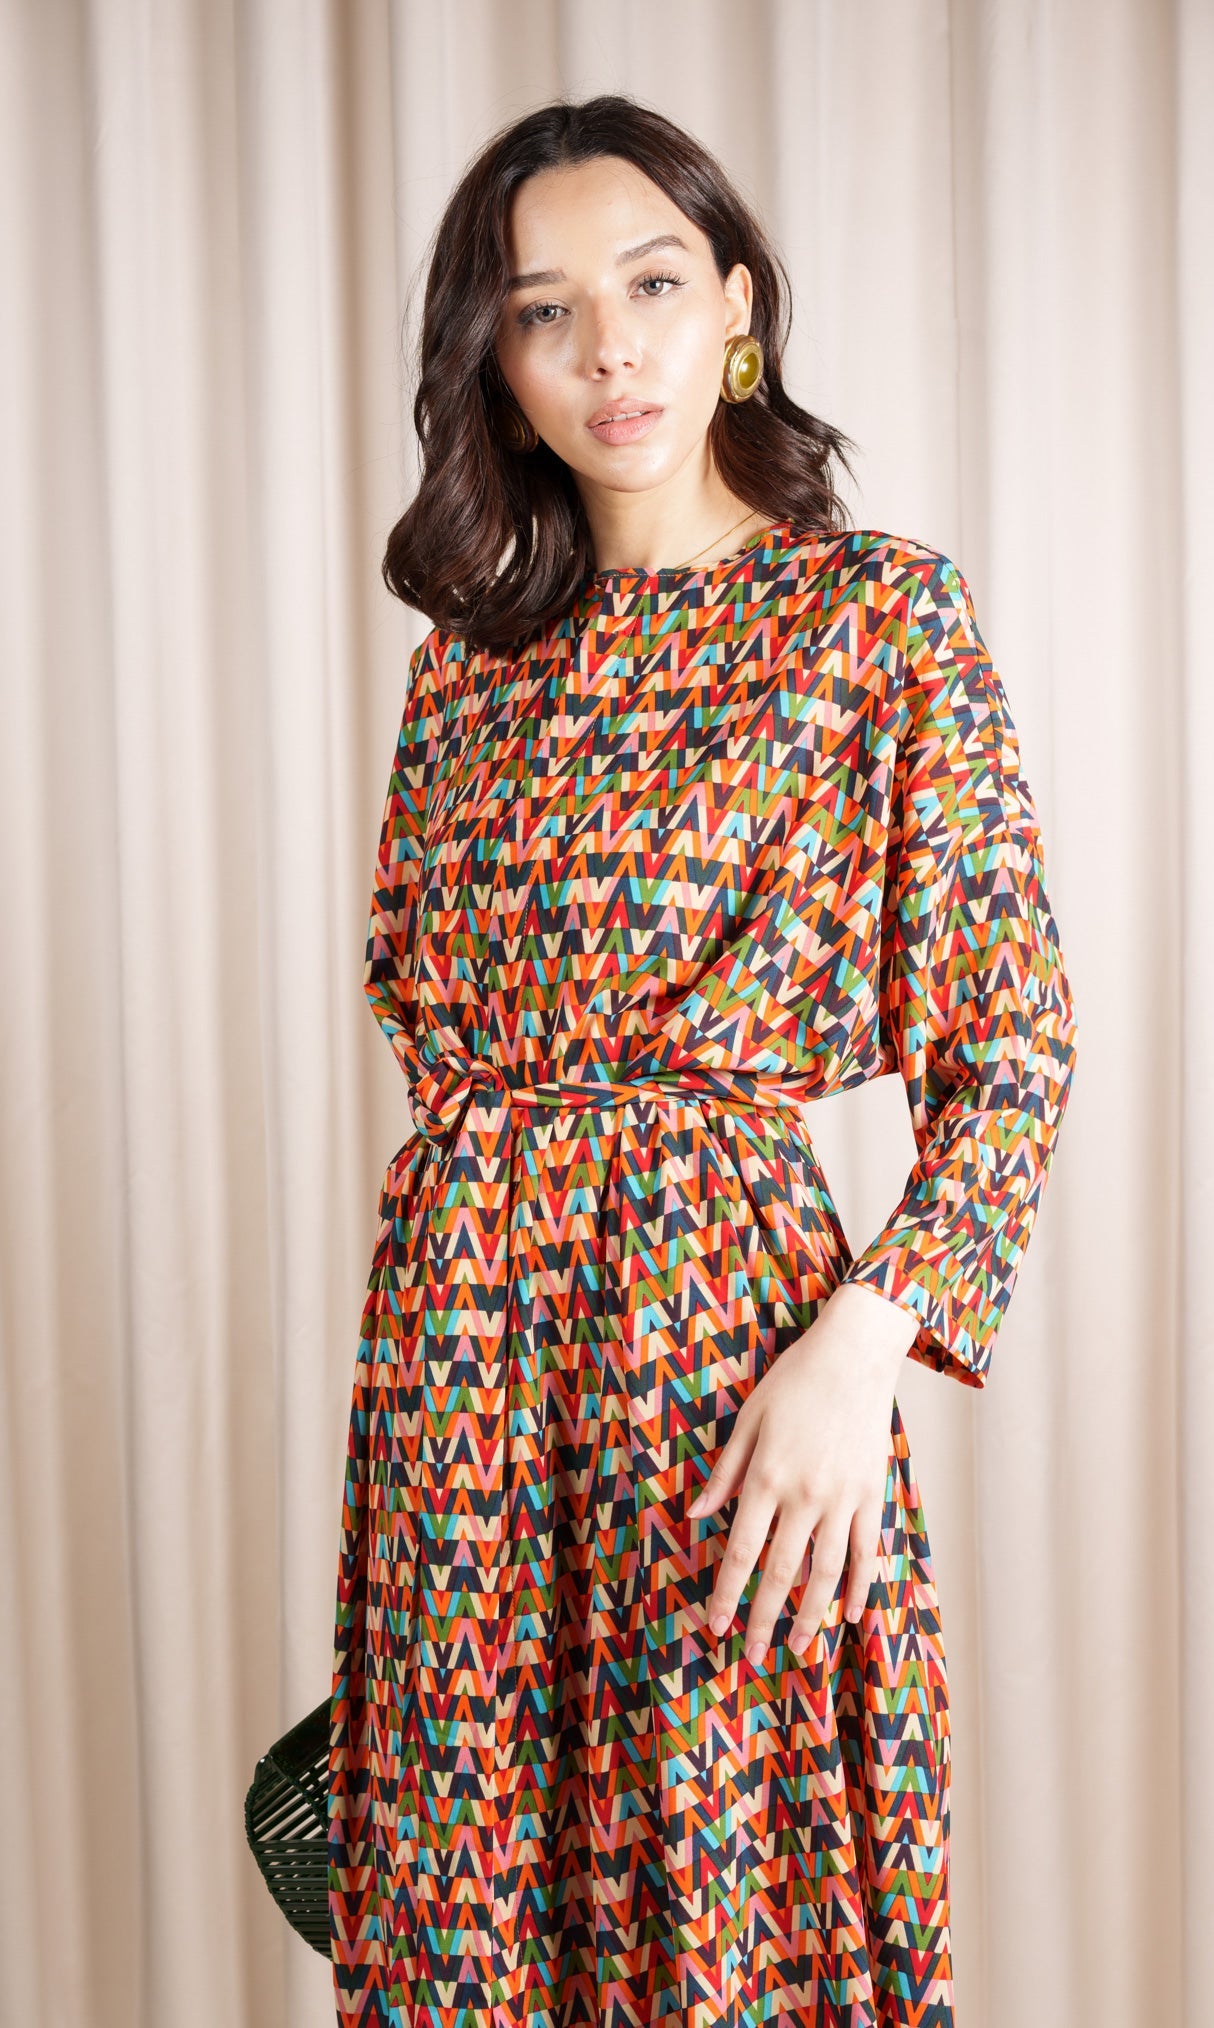 Model wears silk crepe blend dress featuring an exquisite multi-coloured print